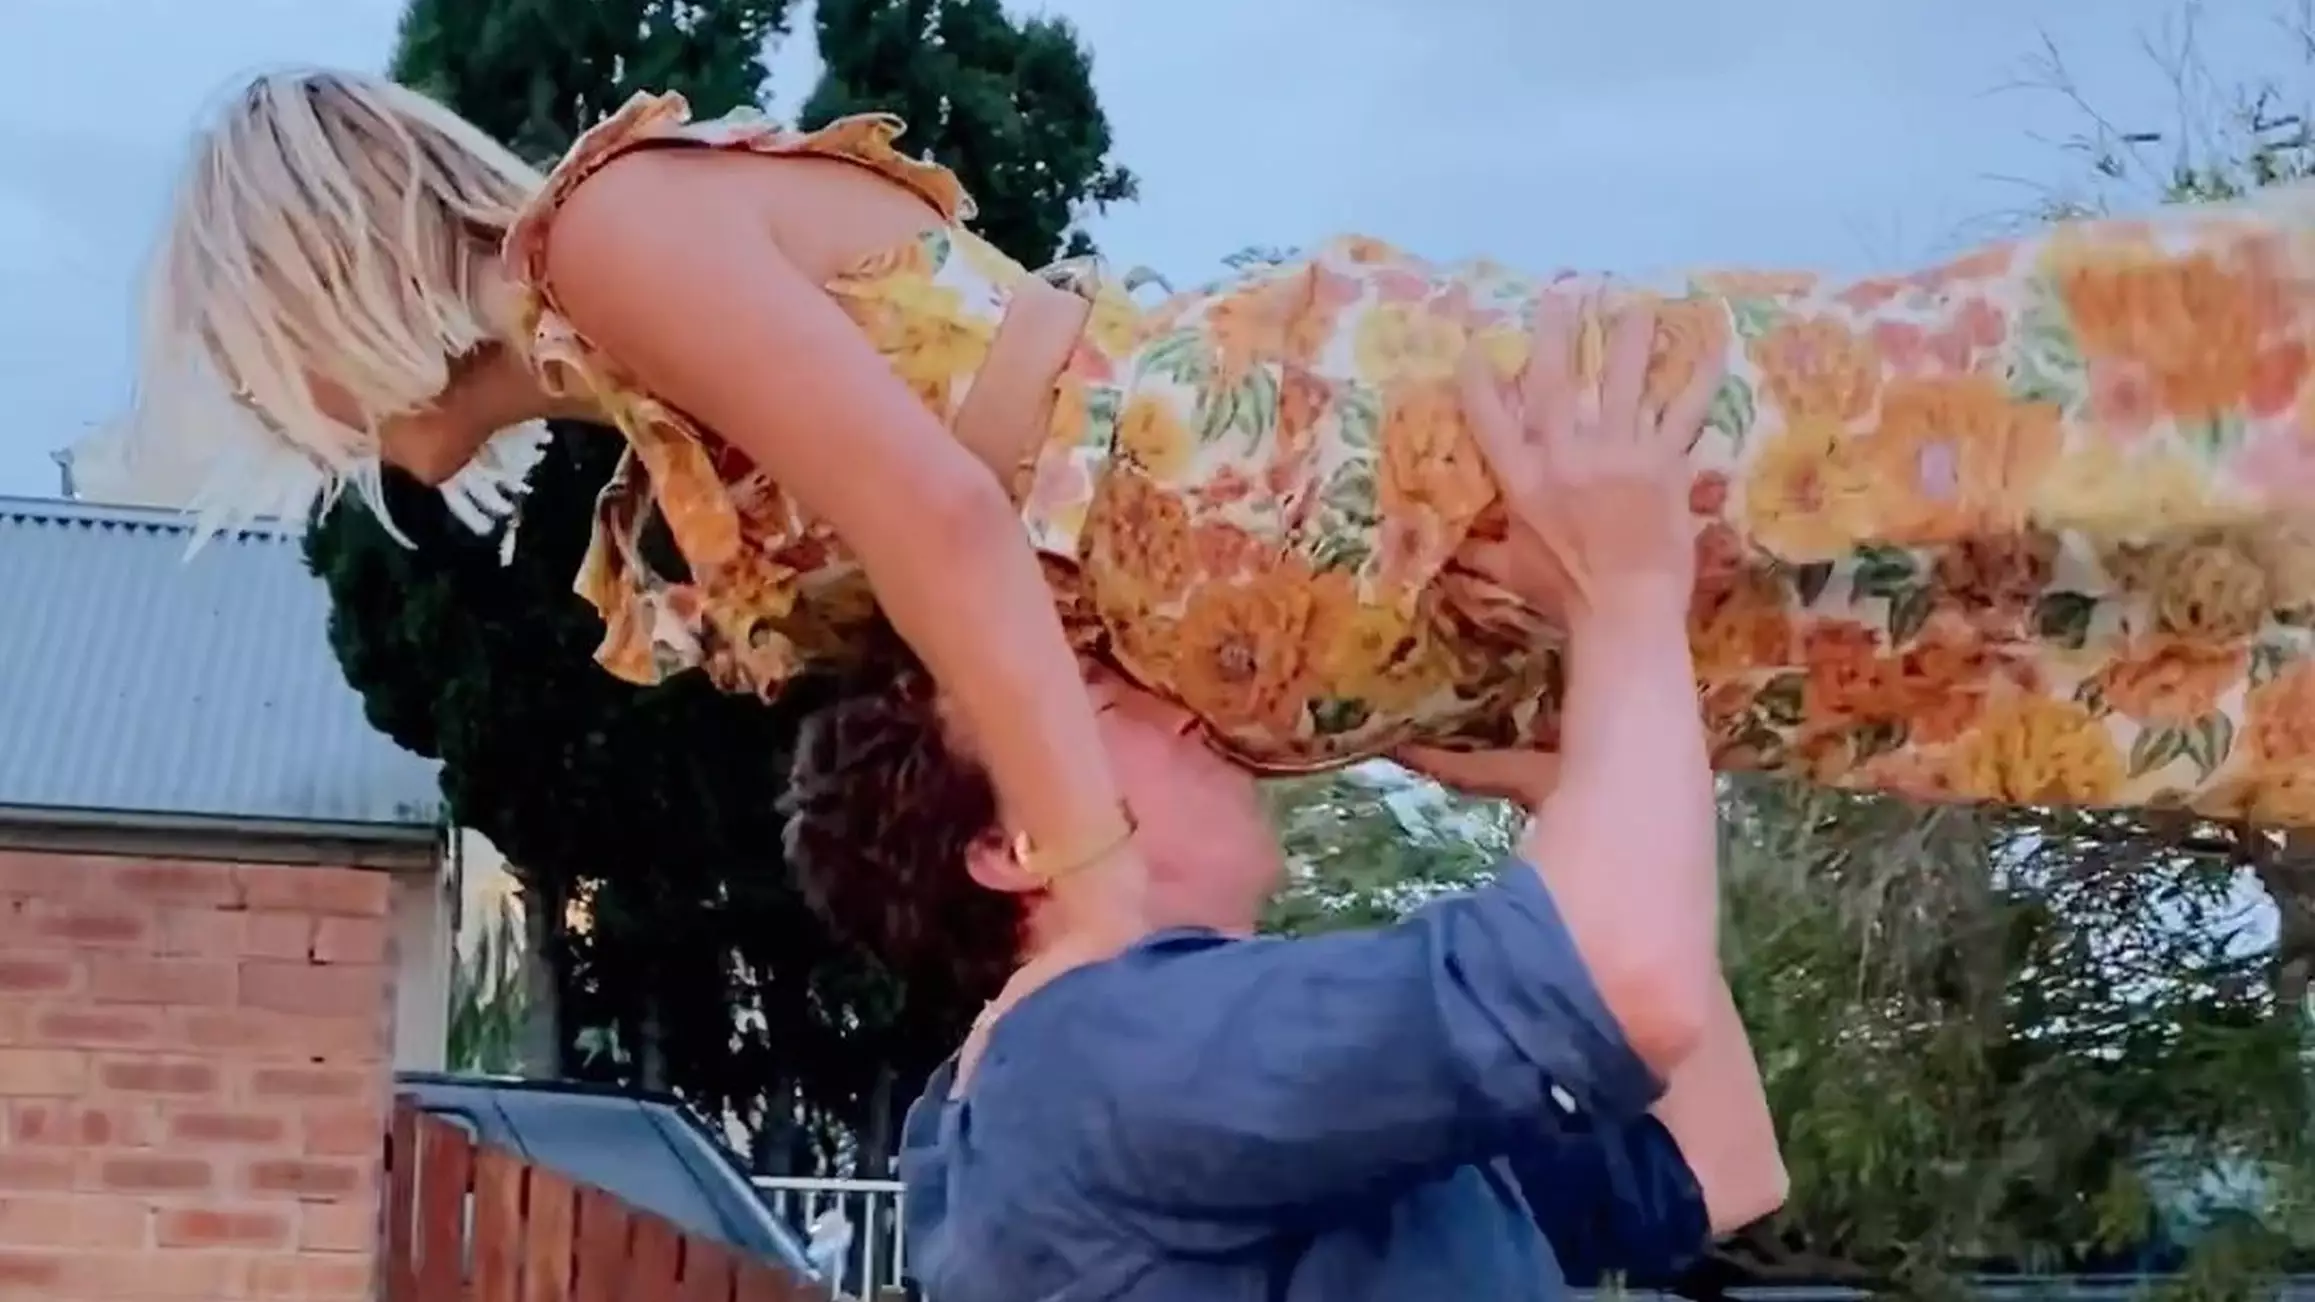 Dancer Miraculously Survives Horror Fall While Drunkenly Attempting Dirty Dancing Lift